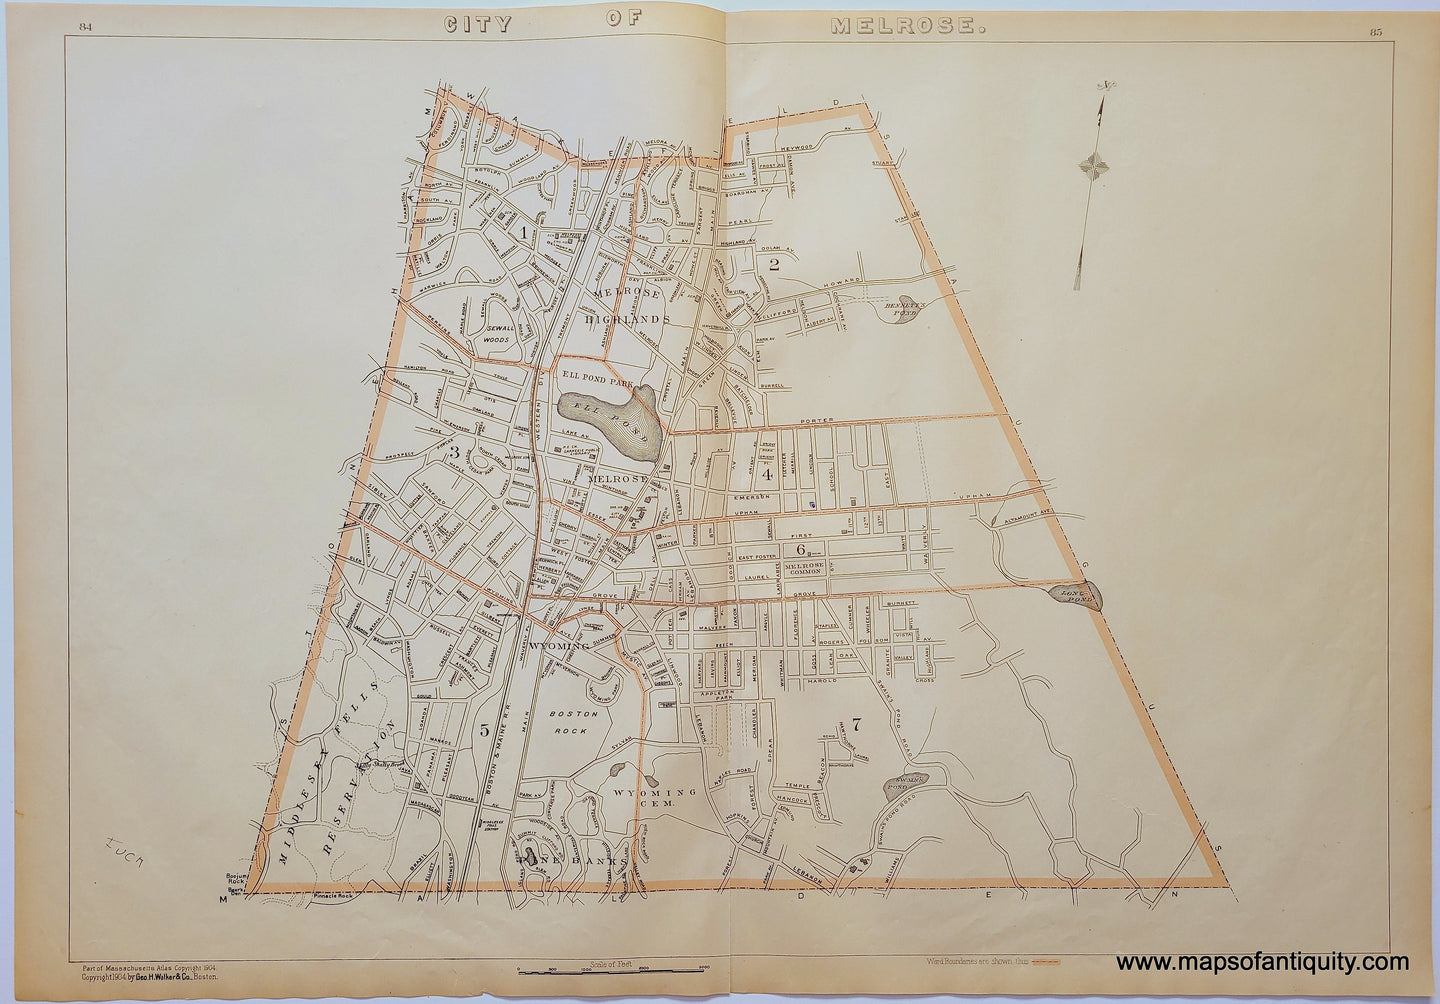 Antique map of the city of Melrose, MA Massachusetts, published 1904 by George H Walker. 20th century. Maps of Antiquity